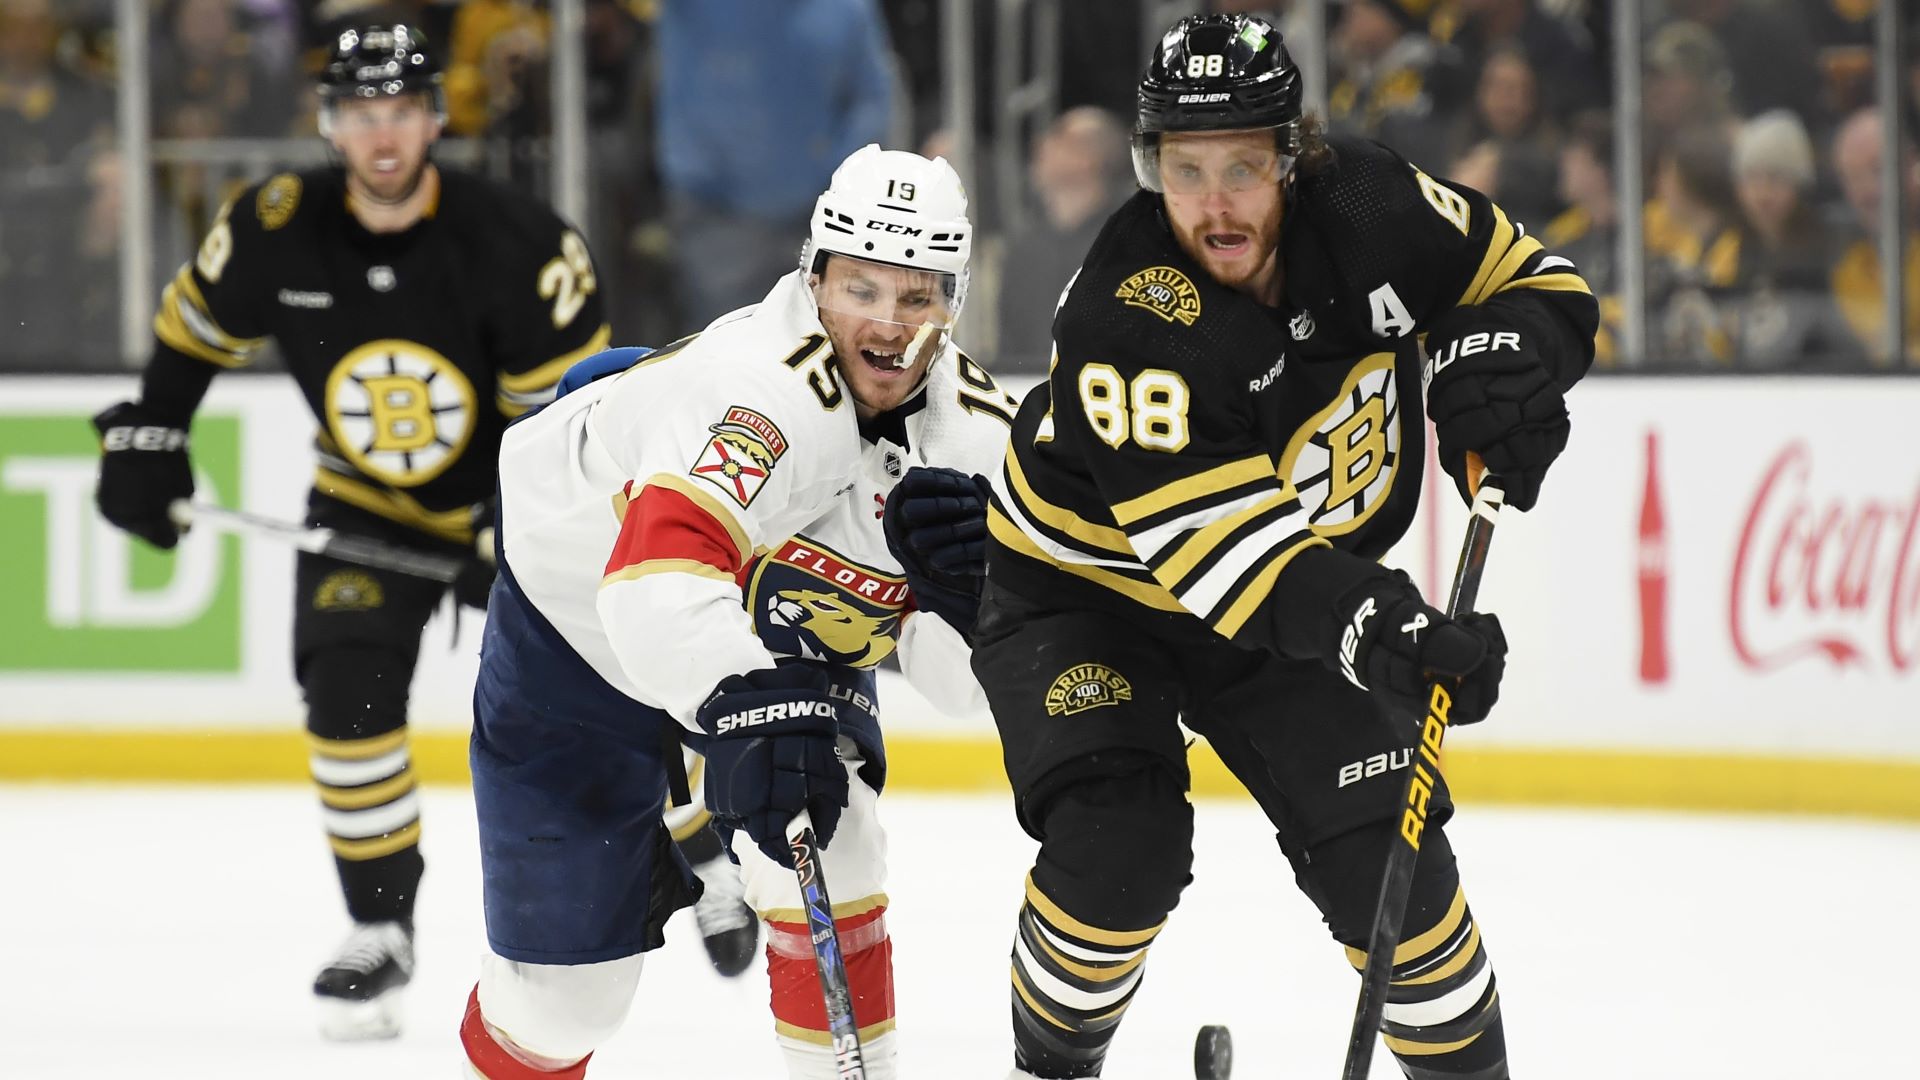 Bruins Vs. Panthers Rematch: Schedule For Second-Round Series